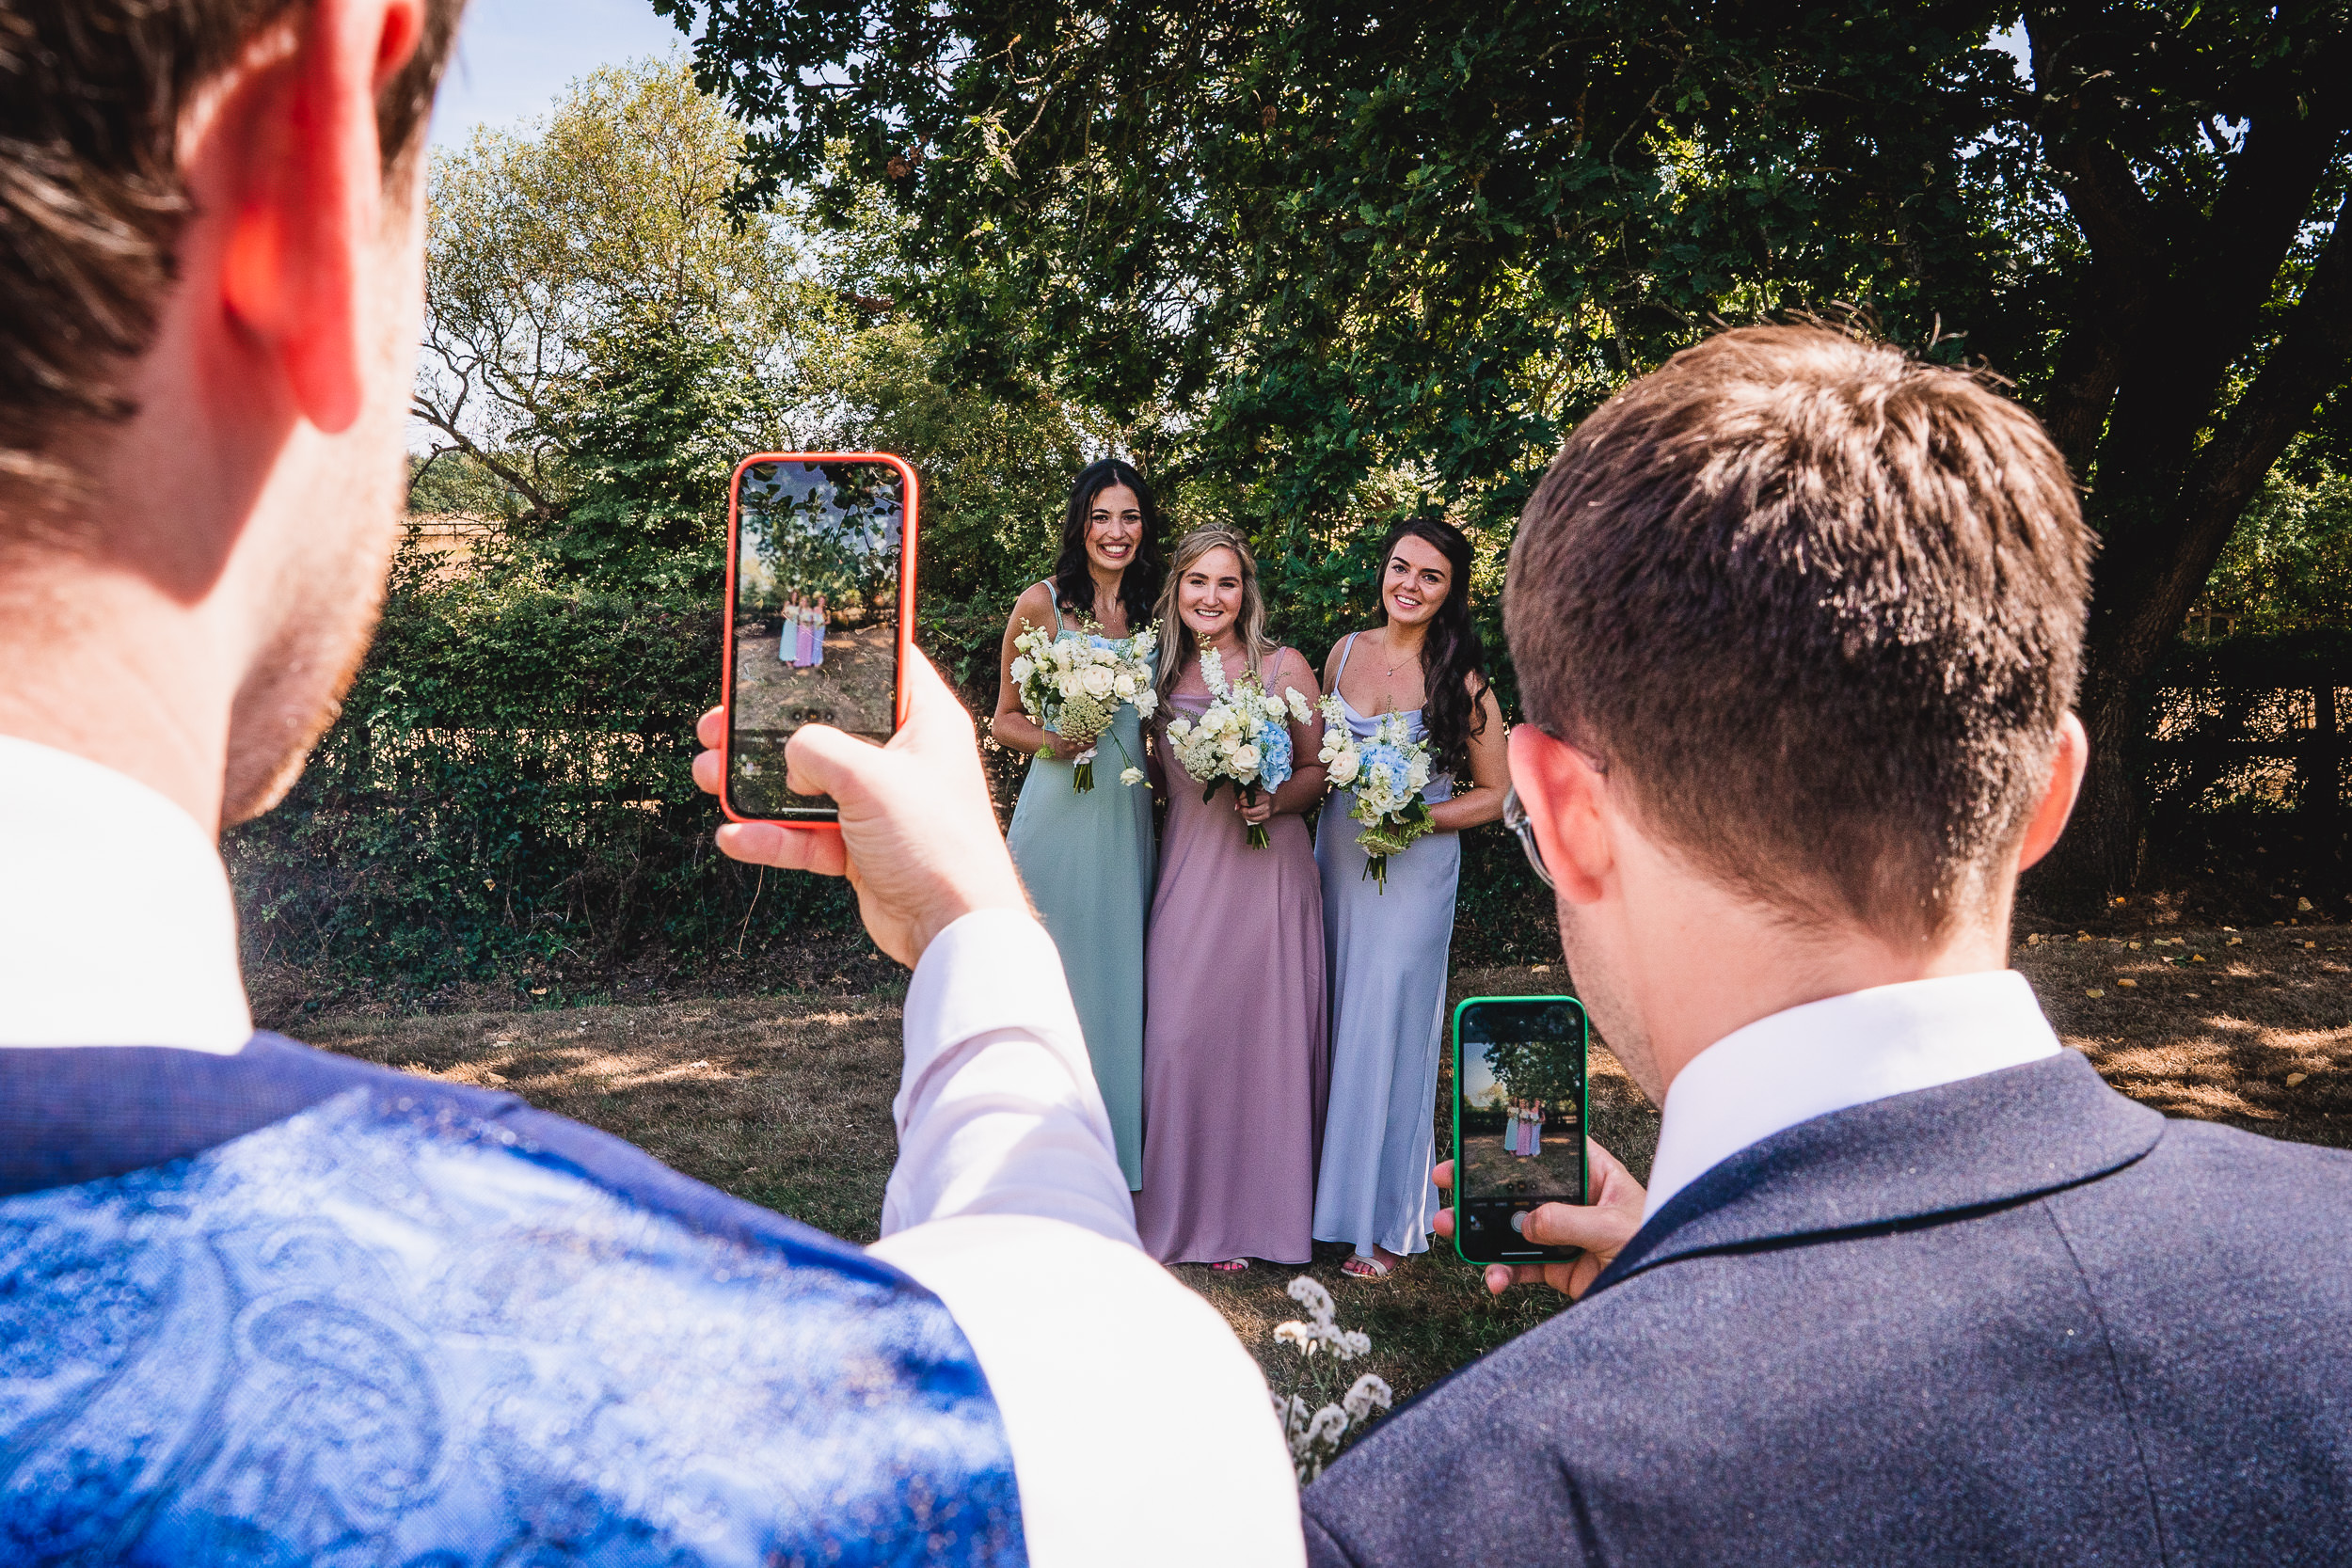 A groom and bride capturing a wedding photo with their cell phone.